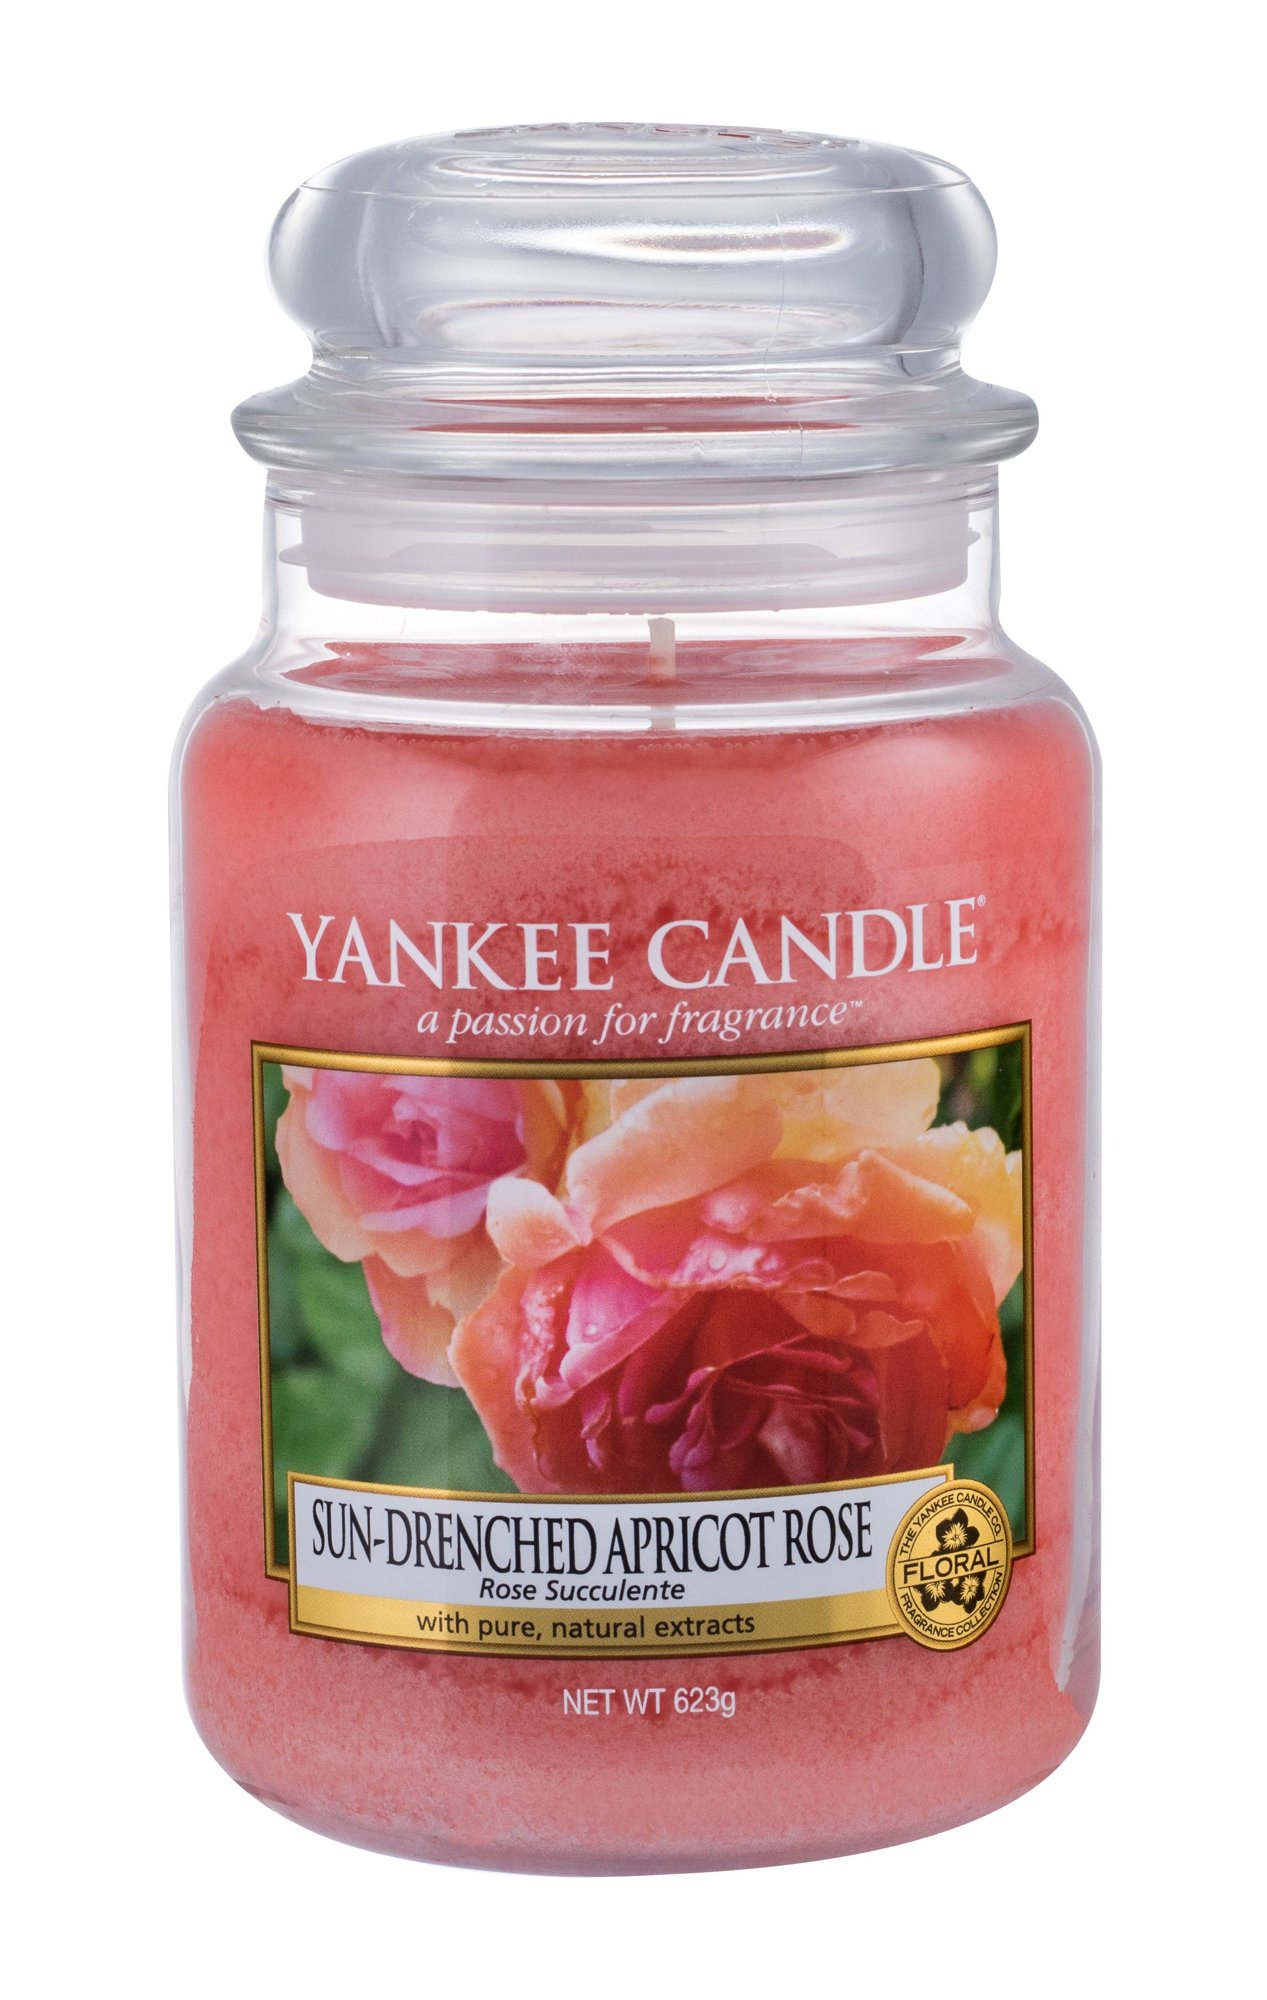 Yankee Candle Sun-Drenched Apricot Rose